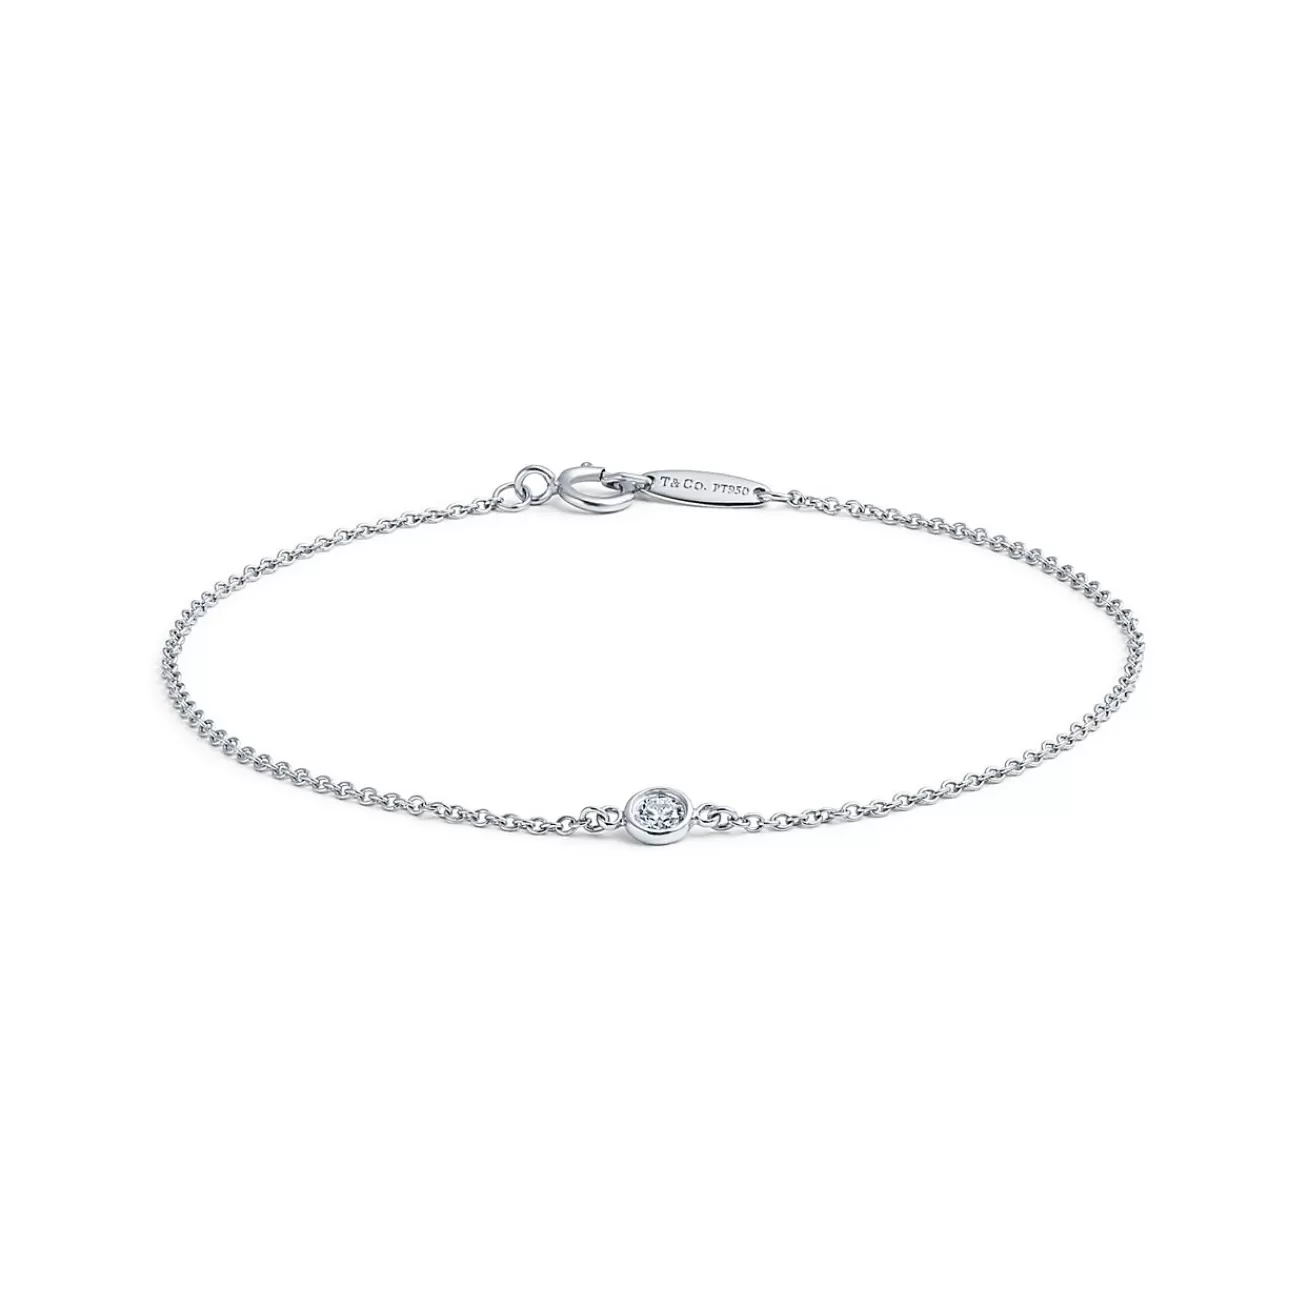 Tiffany & Co. Elsa Peretti® Diamonds by the Yard® bracelet in platinum. | ^ Bracelets | Gifts for Her